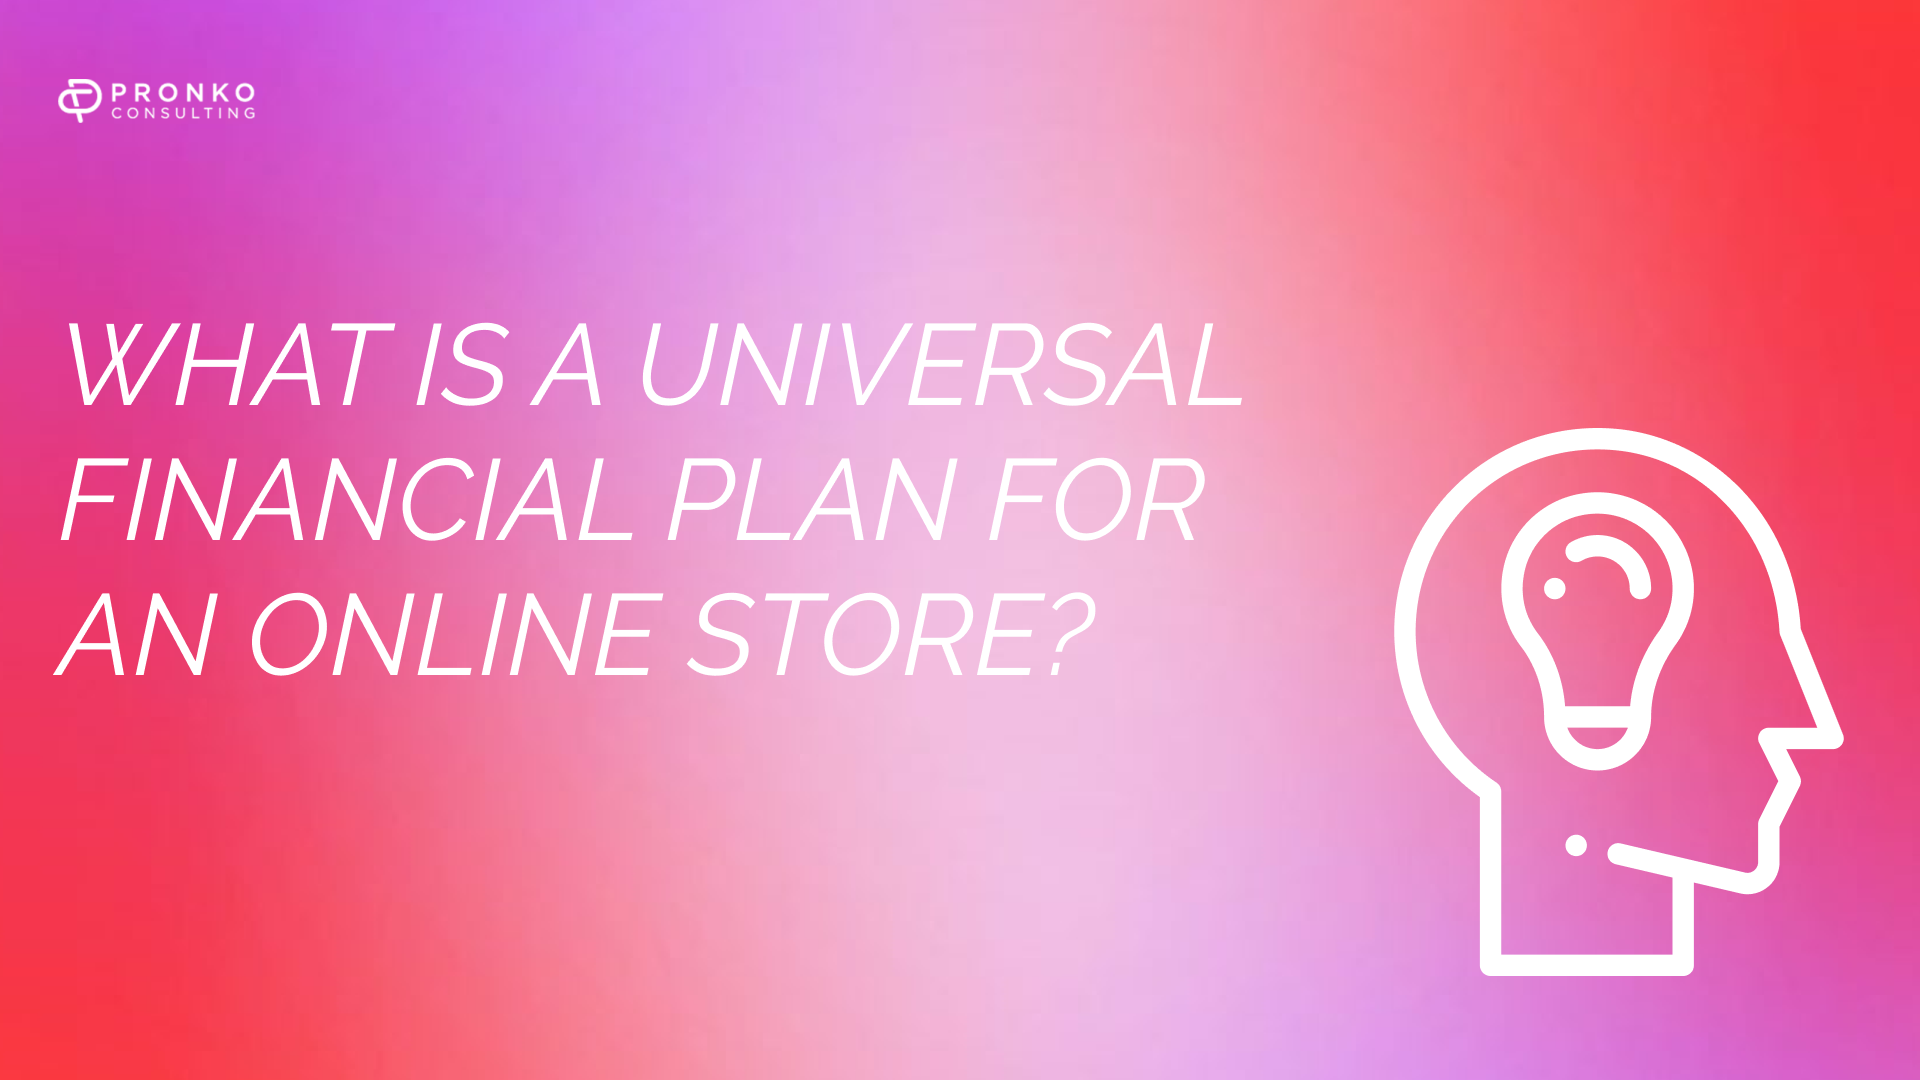 What is a universal financial plan for an online store?